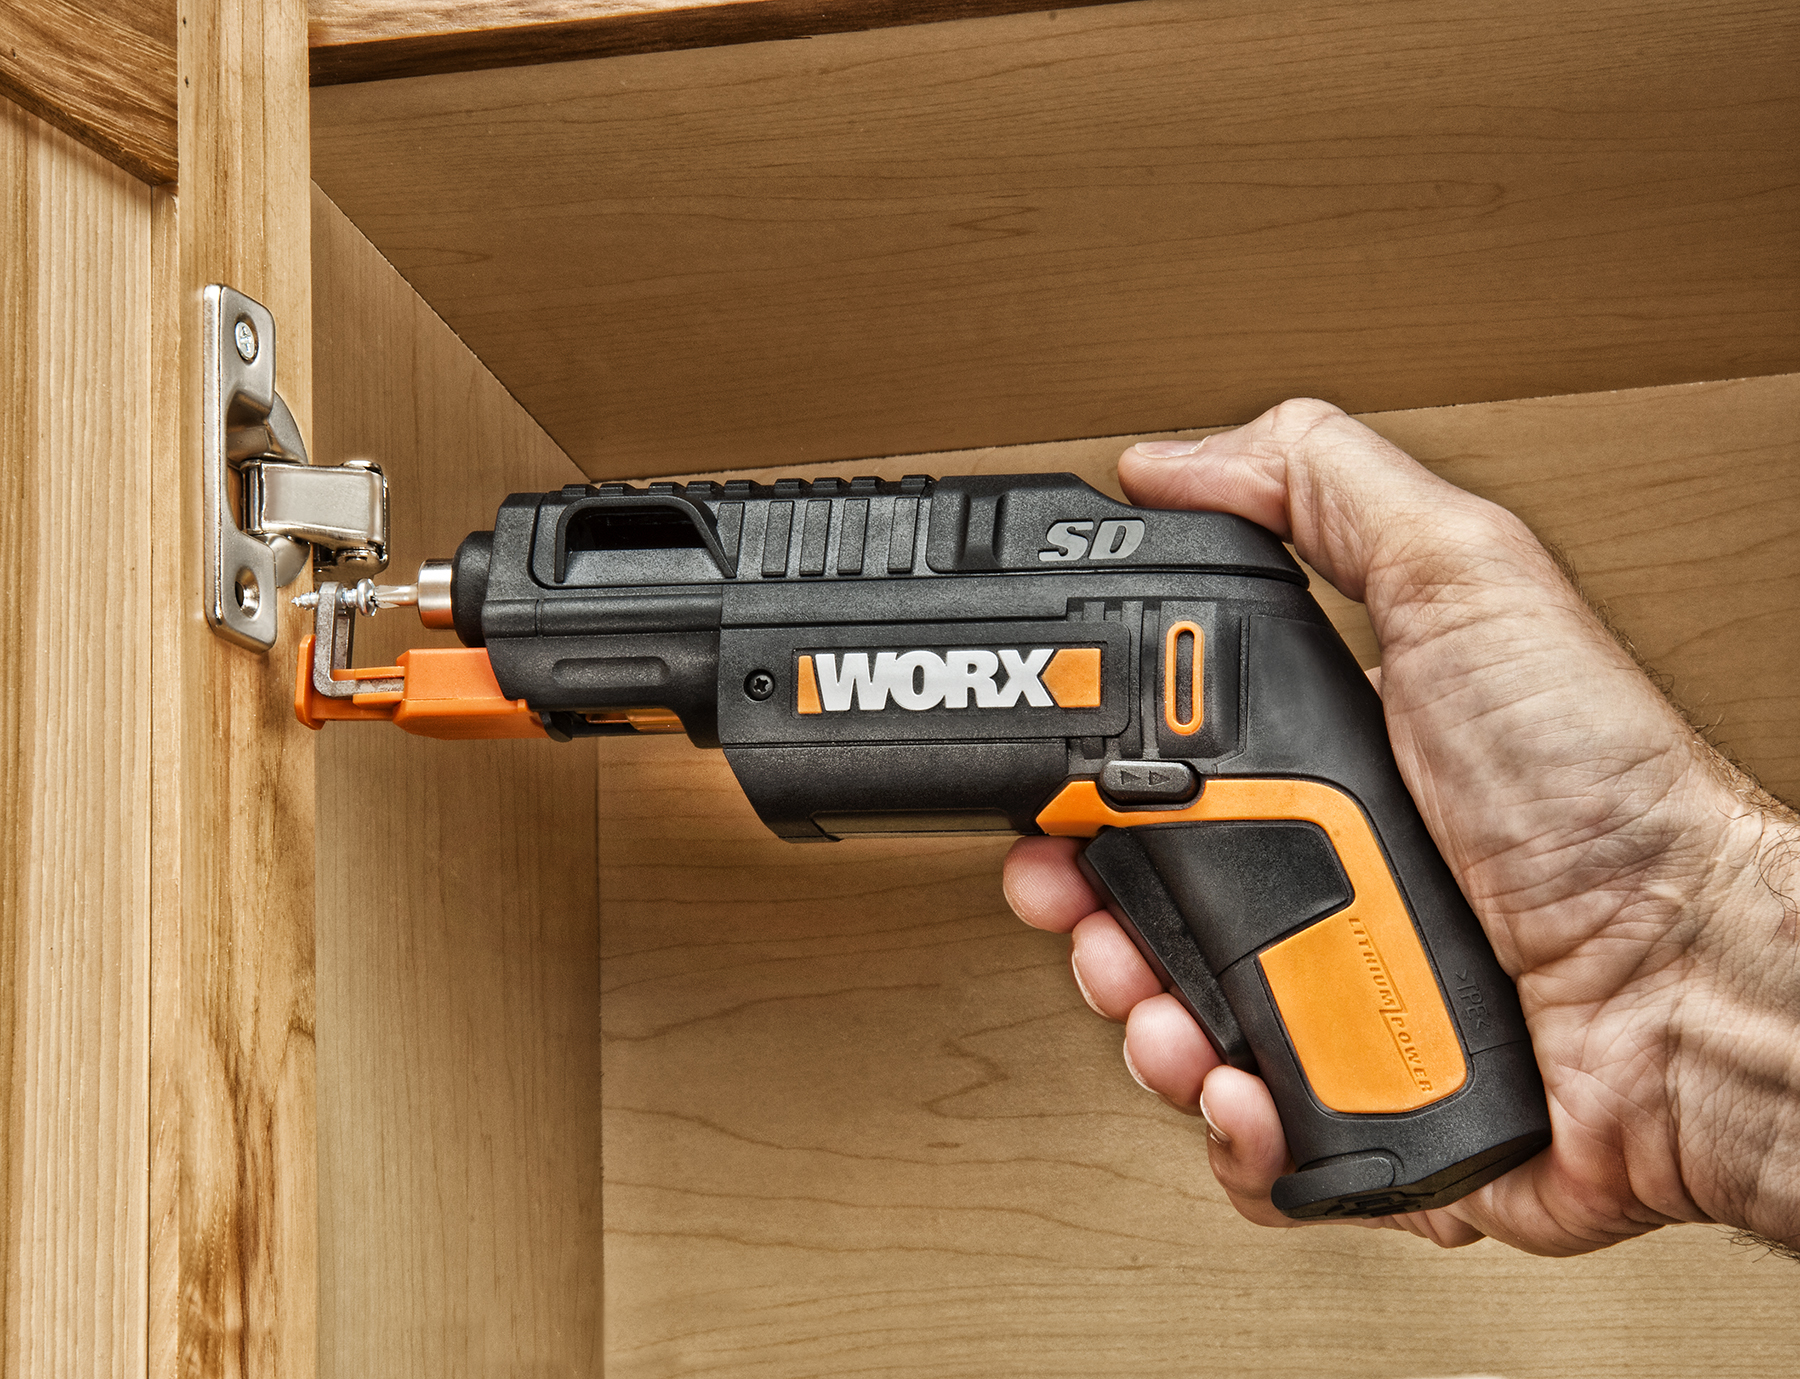 WORX SD SemiAutomatic Driver with Screw Holder sets and levels screw while fastening hinge.